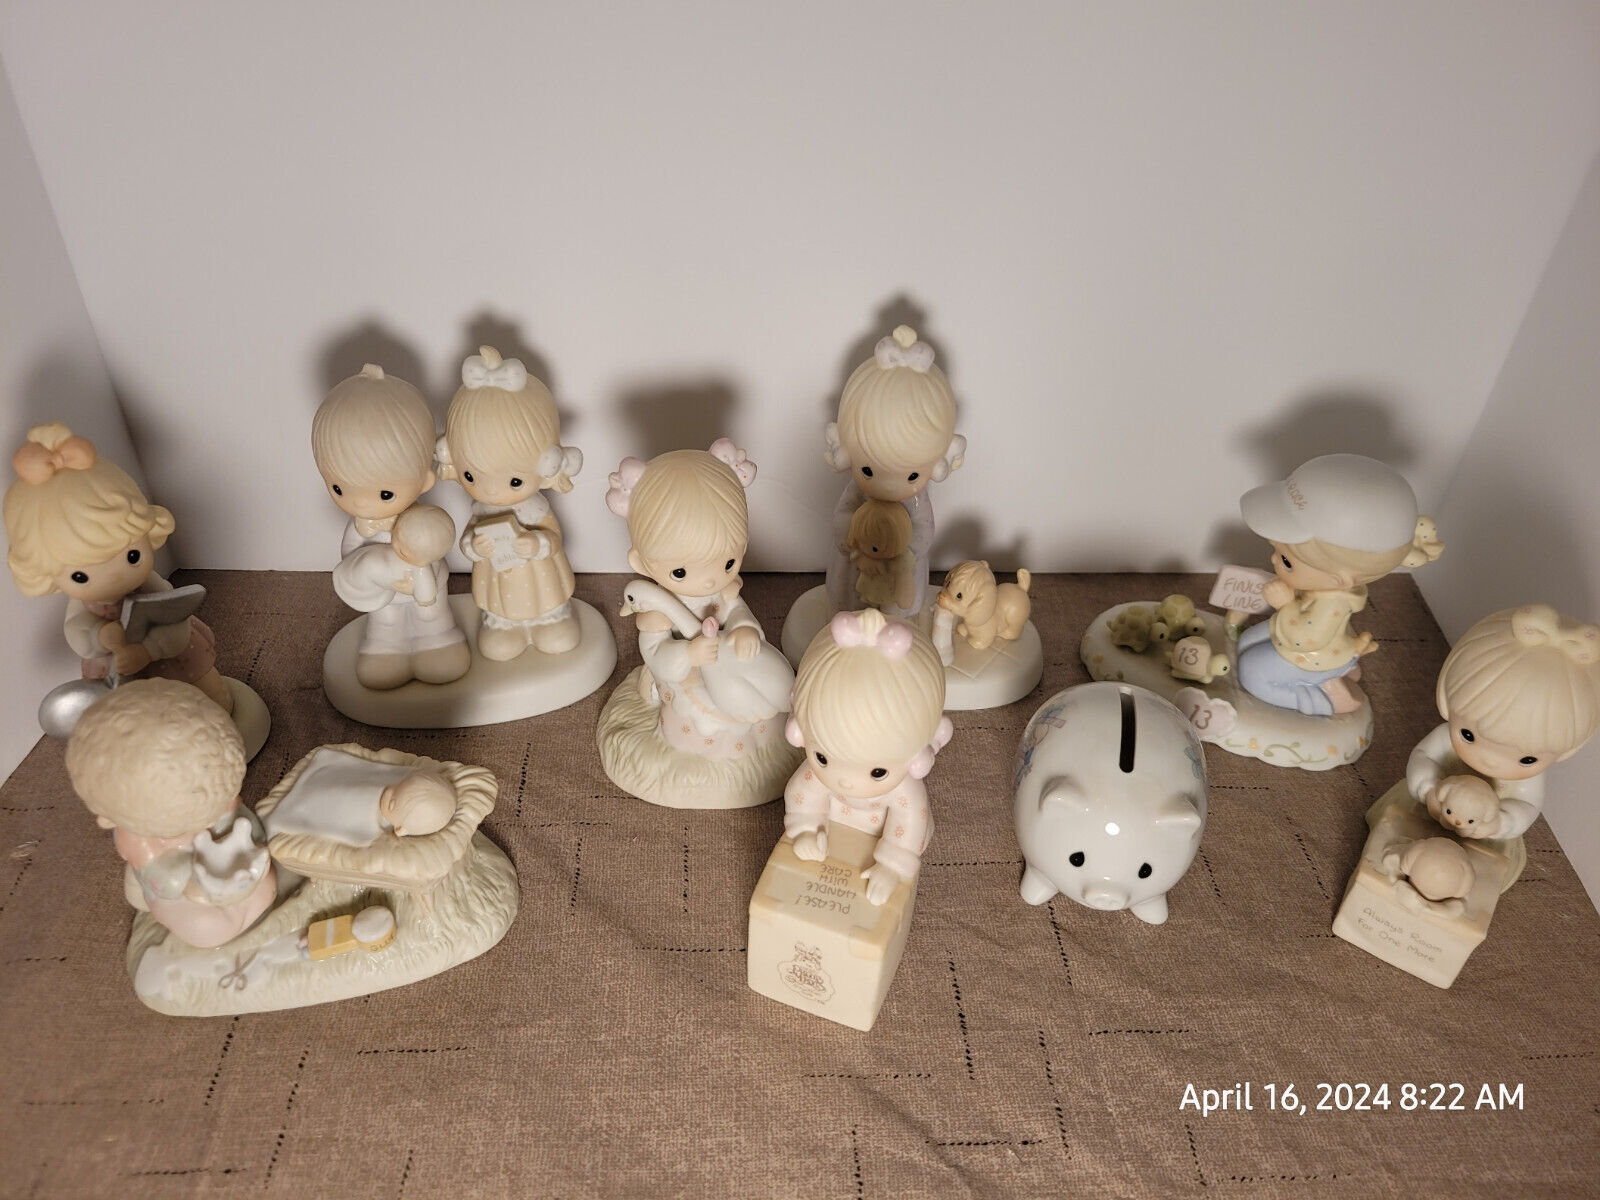 Enesco Precious Moments Figurines - 9 To Choose From - Details in Description